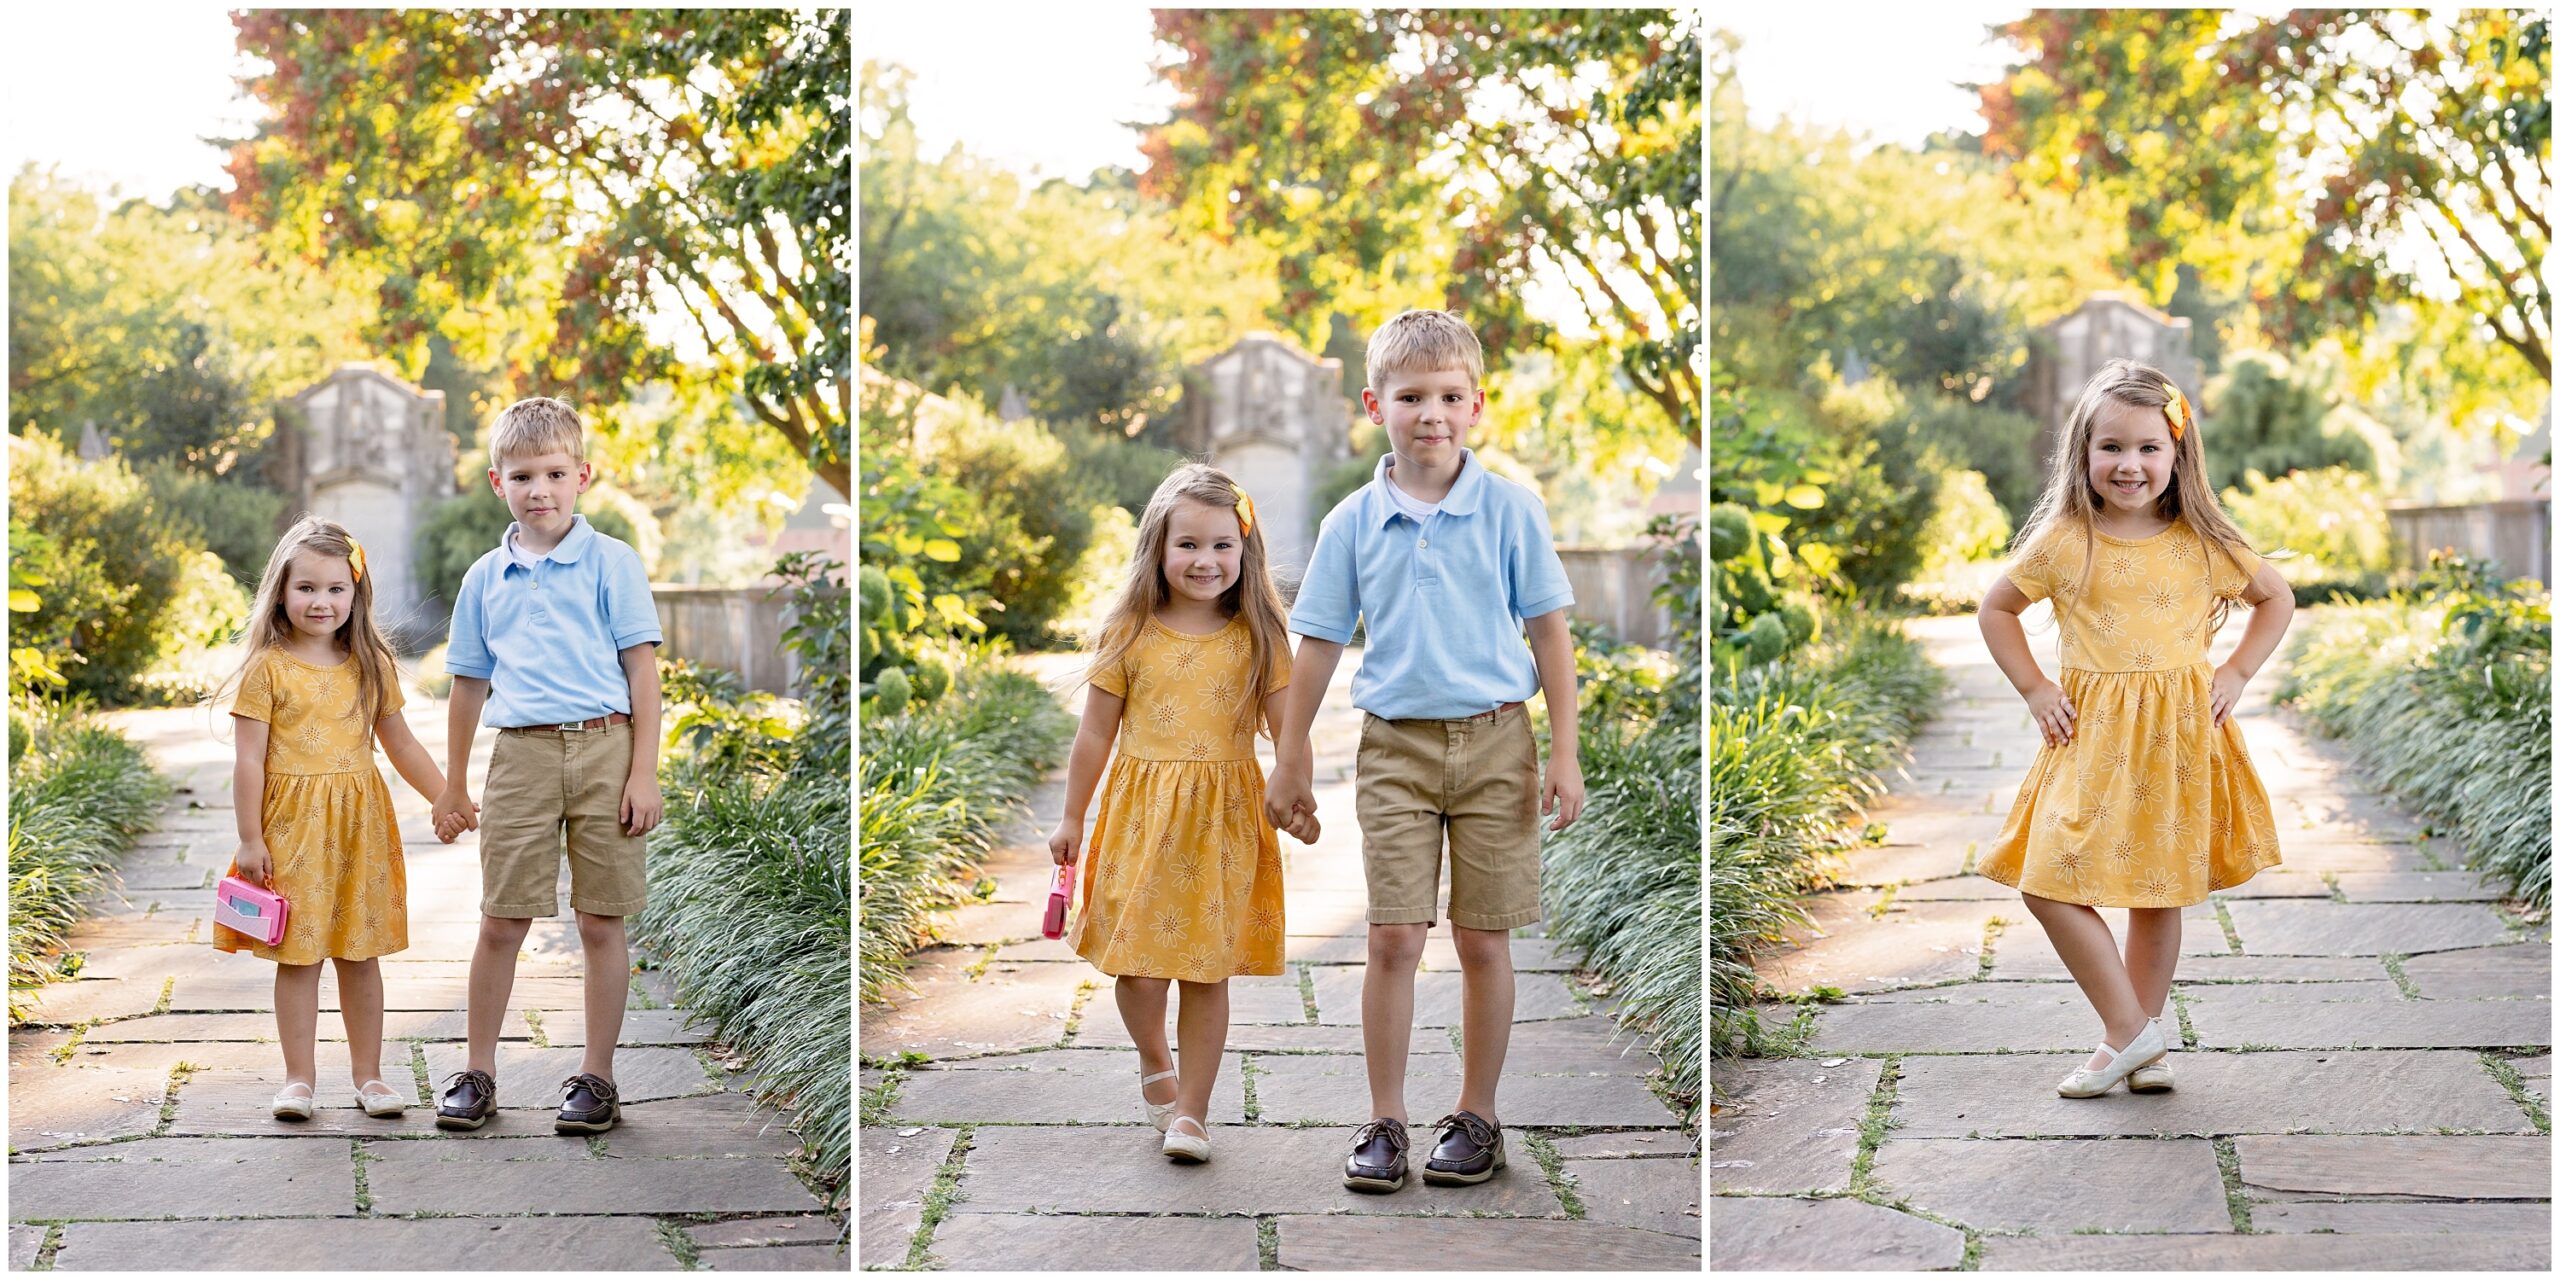 Mellon Park Family Session in Pittsburgh PA Photographed by Pittsburgh Family Photographer Acevedo Weddings